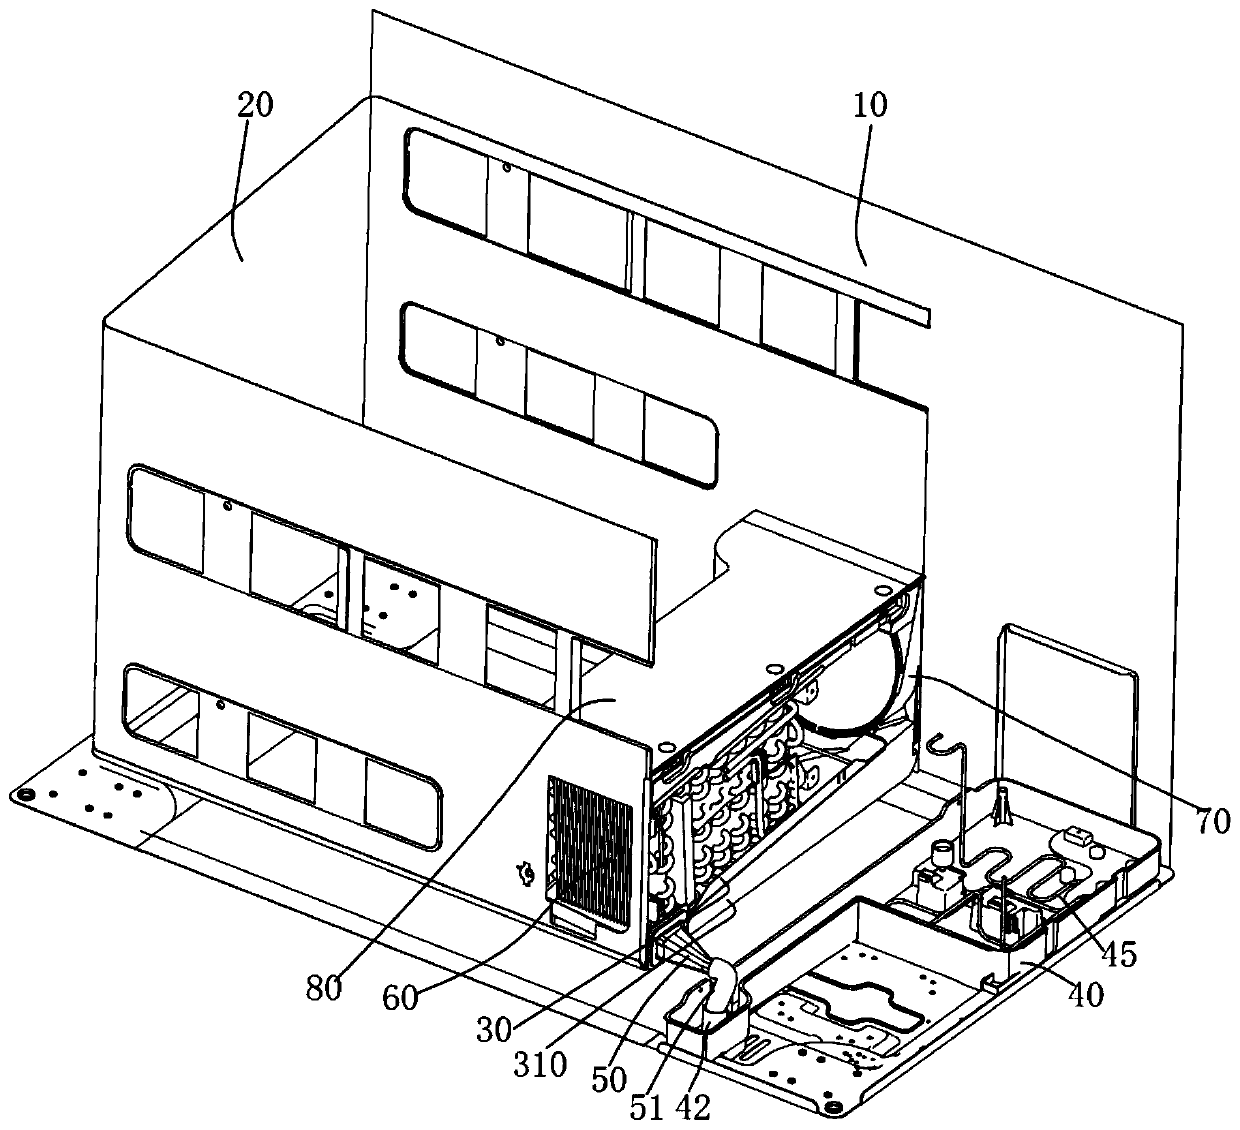 Drainage structure and horizontal refrigerator